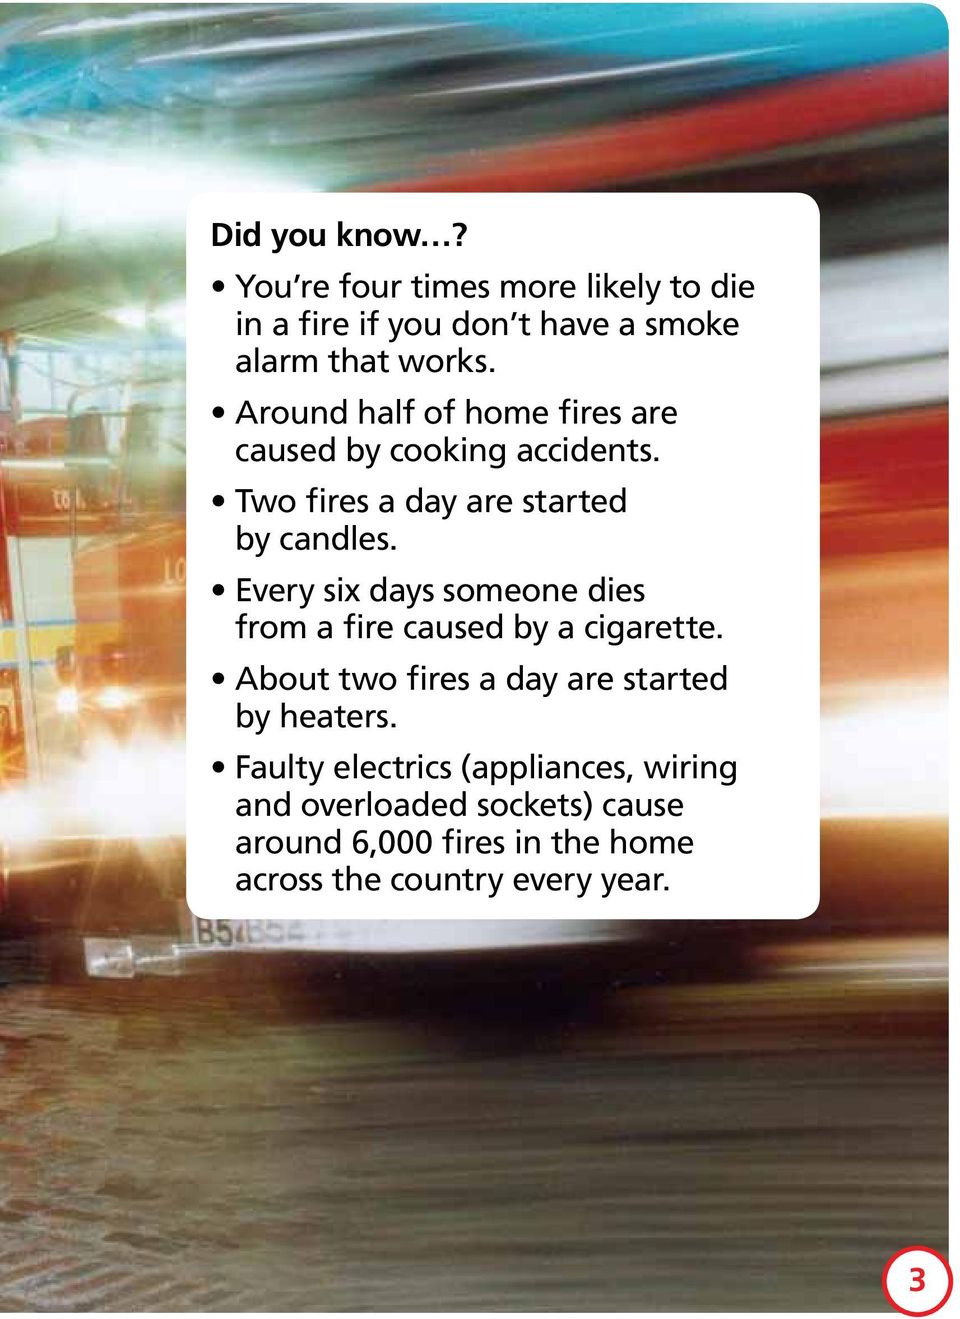 Every six days someone dies from a fire caused by a cigarette. About two fires a day are started by heaters.